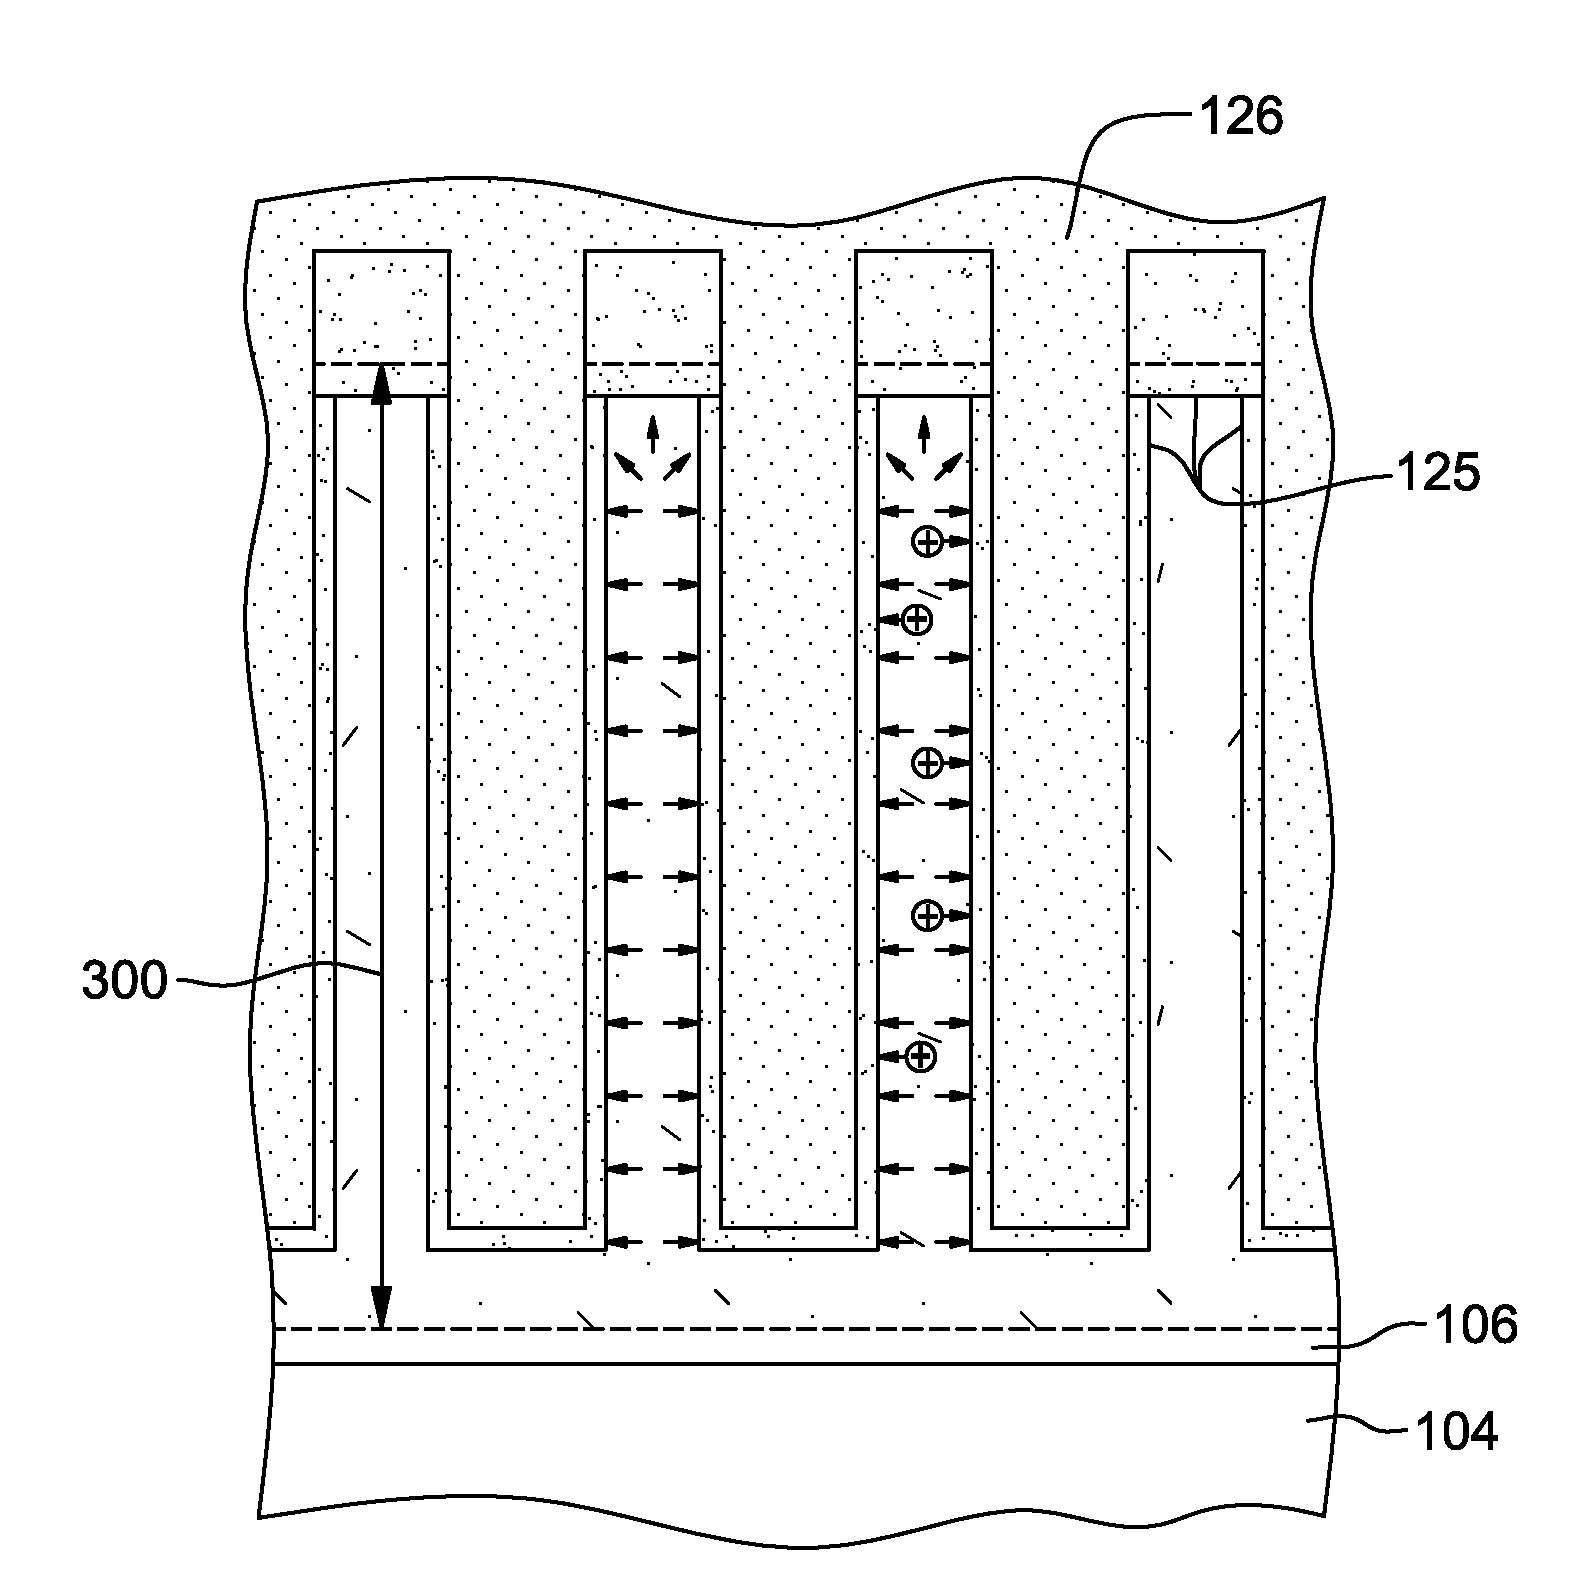 Neutron-detecting apparatuses and methods of fabrication